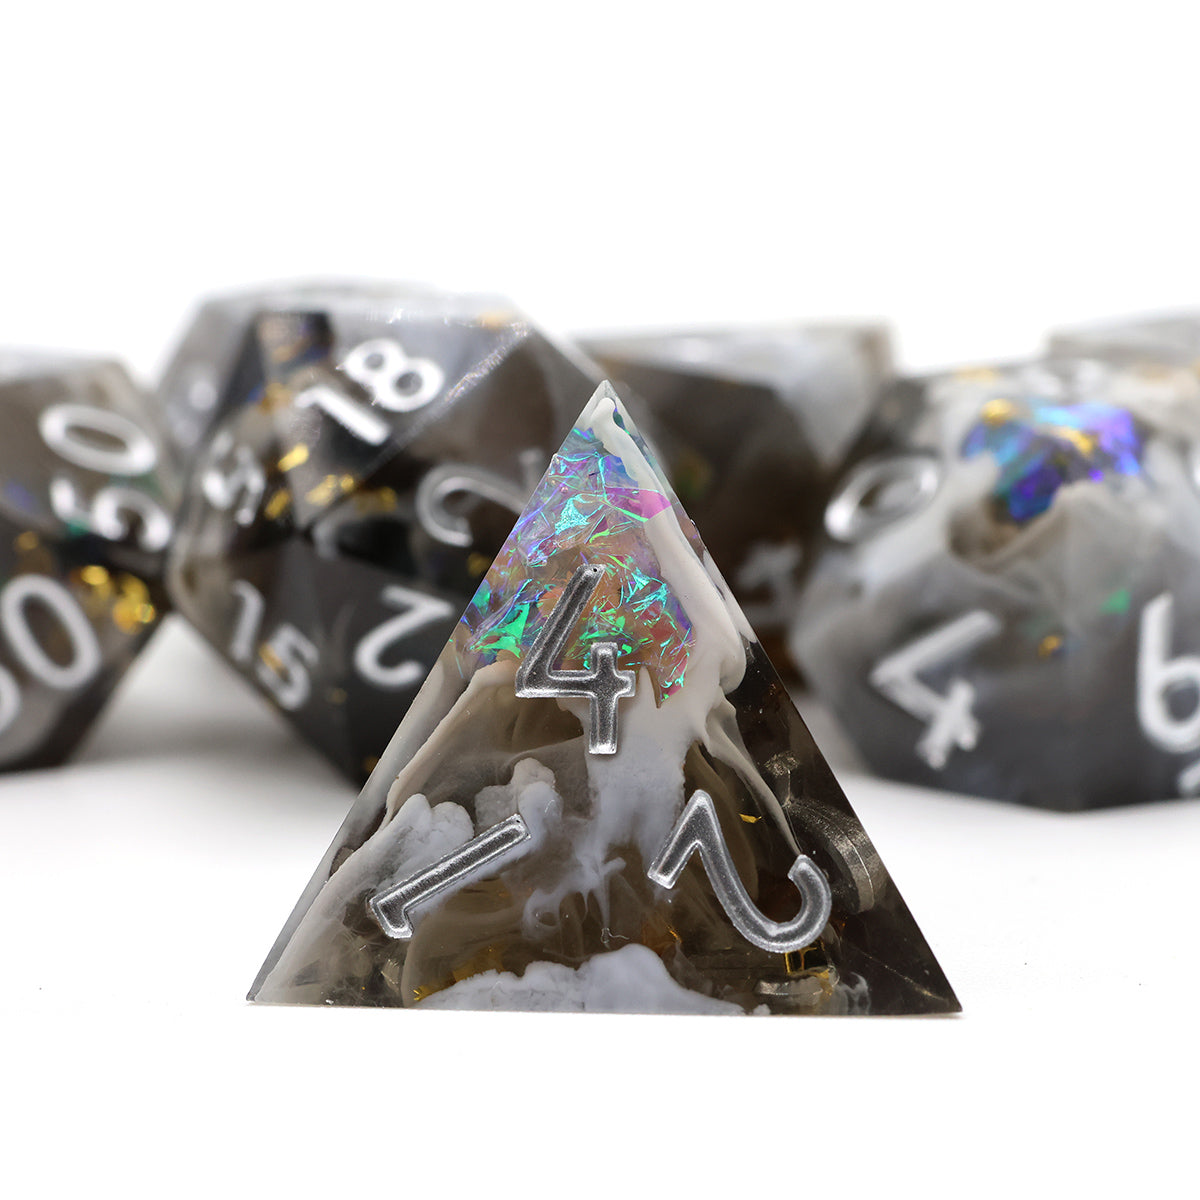 sharp edged dnd TTRPG dice set, role playing games and dice goblin collectors